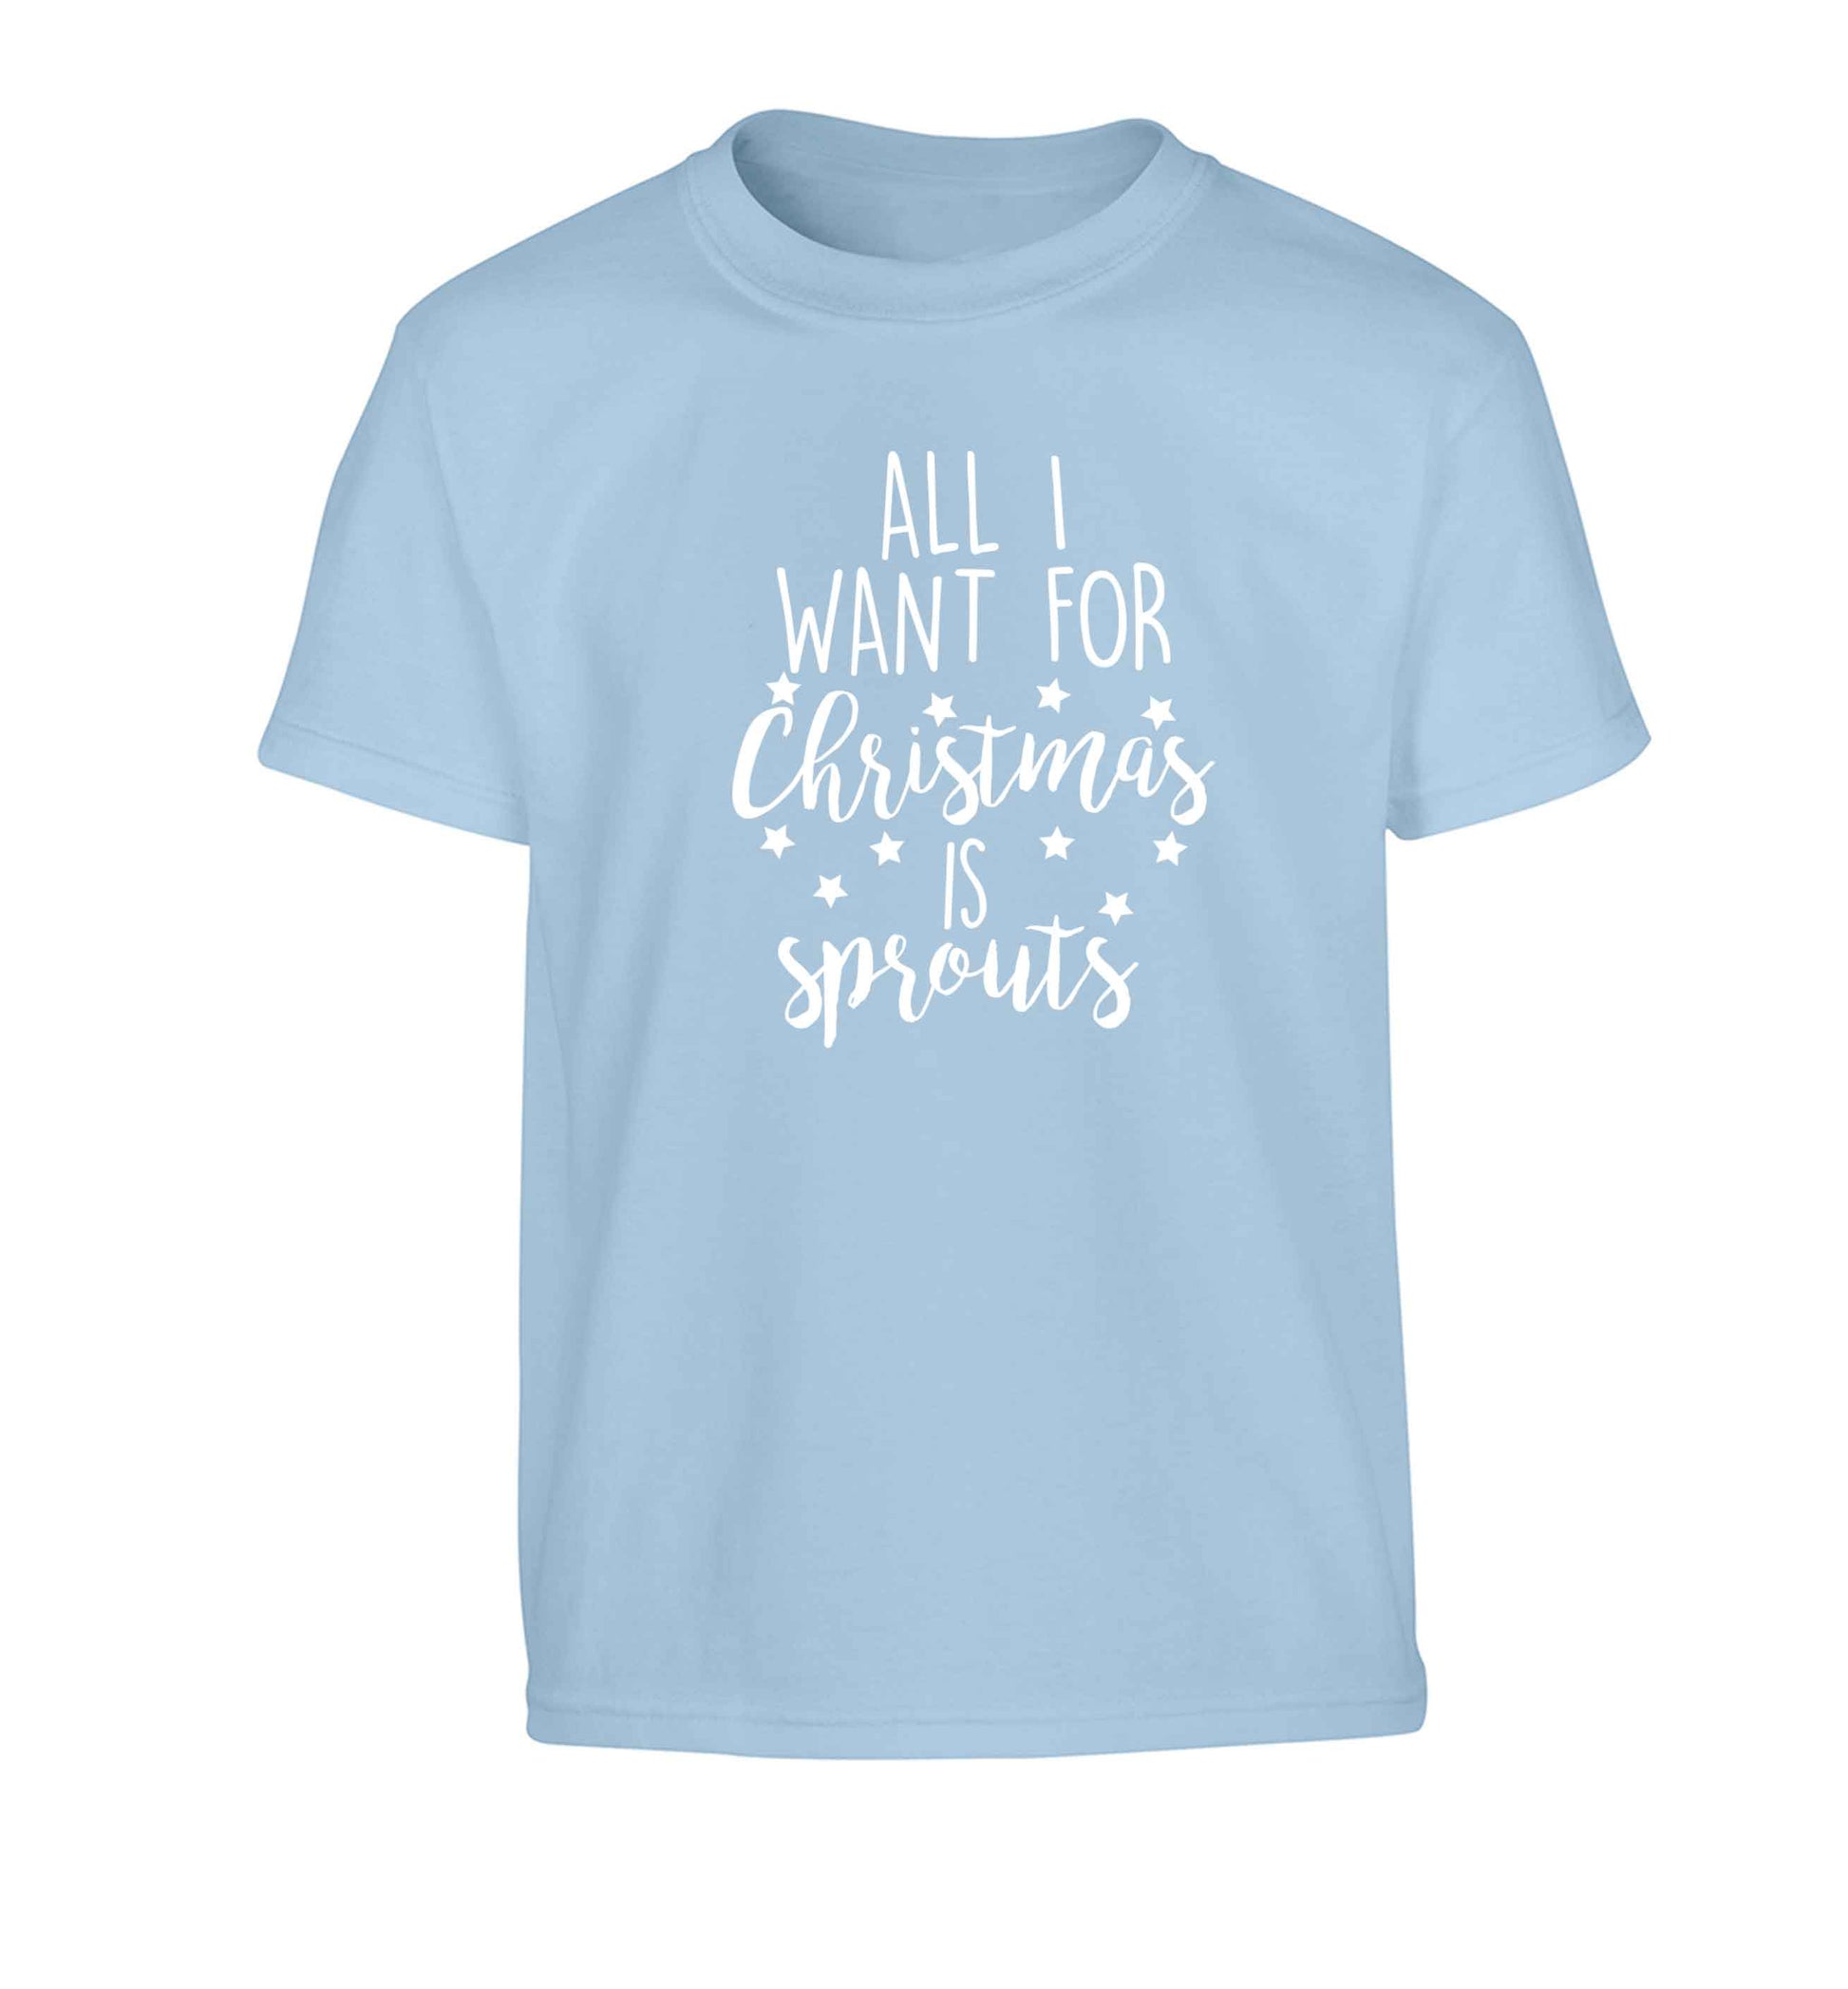 All I want for Christmas is sprouts Children's light blue Tshirt 12-13 Years